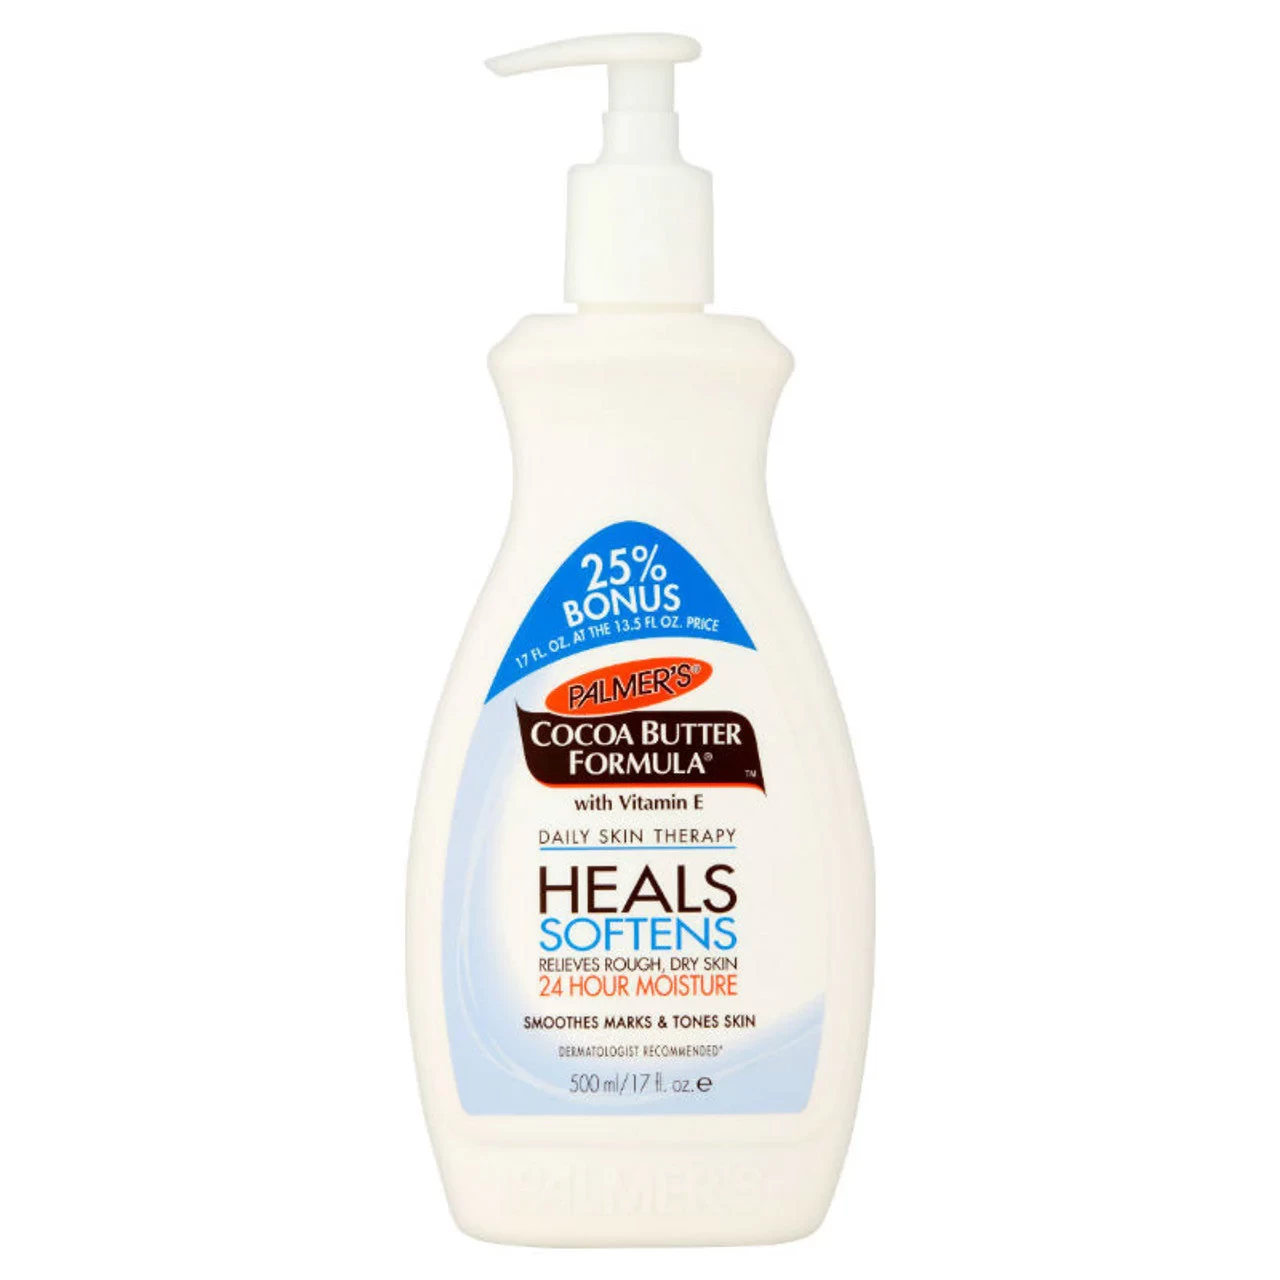 Palmer's Cocoa Butter Formula Daily Skin Therapy Lotion (17 Oz.)